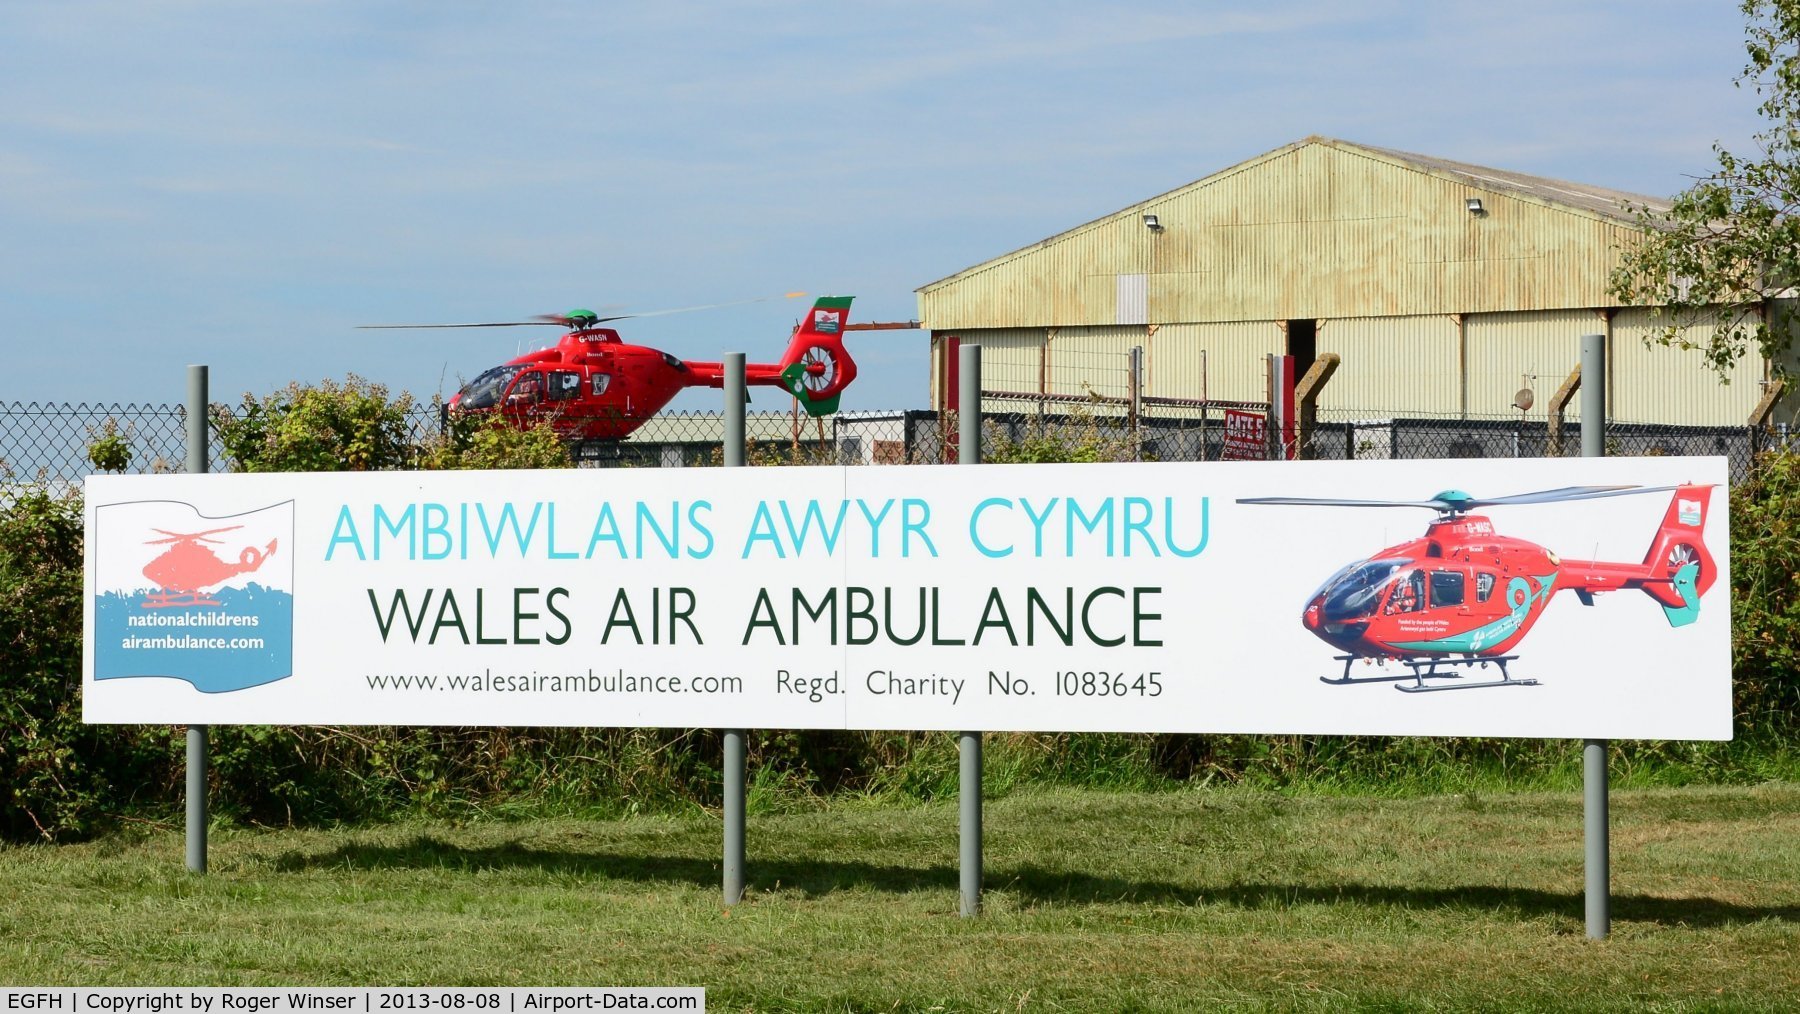 Swansea Airport, Swansea, Wales United Kingdom (EGFH) - Sign by the entrance to Swansea Airport showing the charity (Wales Air Ambulance) funding the three air ambulance helicopters operating in Wales. The Swansea based air ambulance helicopter (Helimed 57) is responding to an emergency